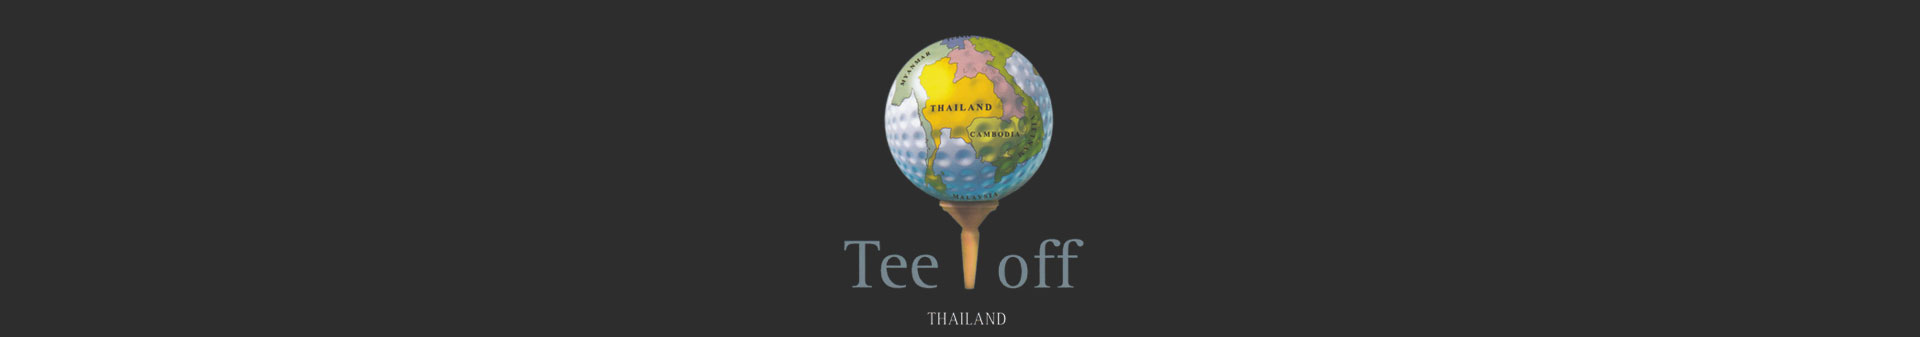 Tee off in Thailand